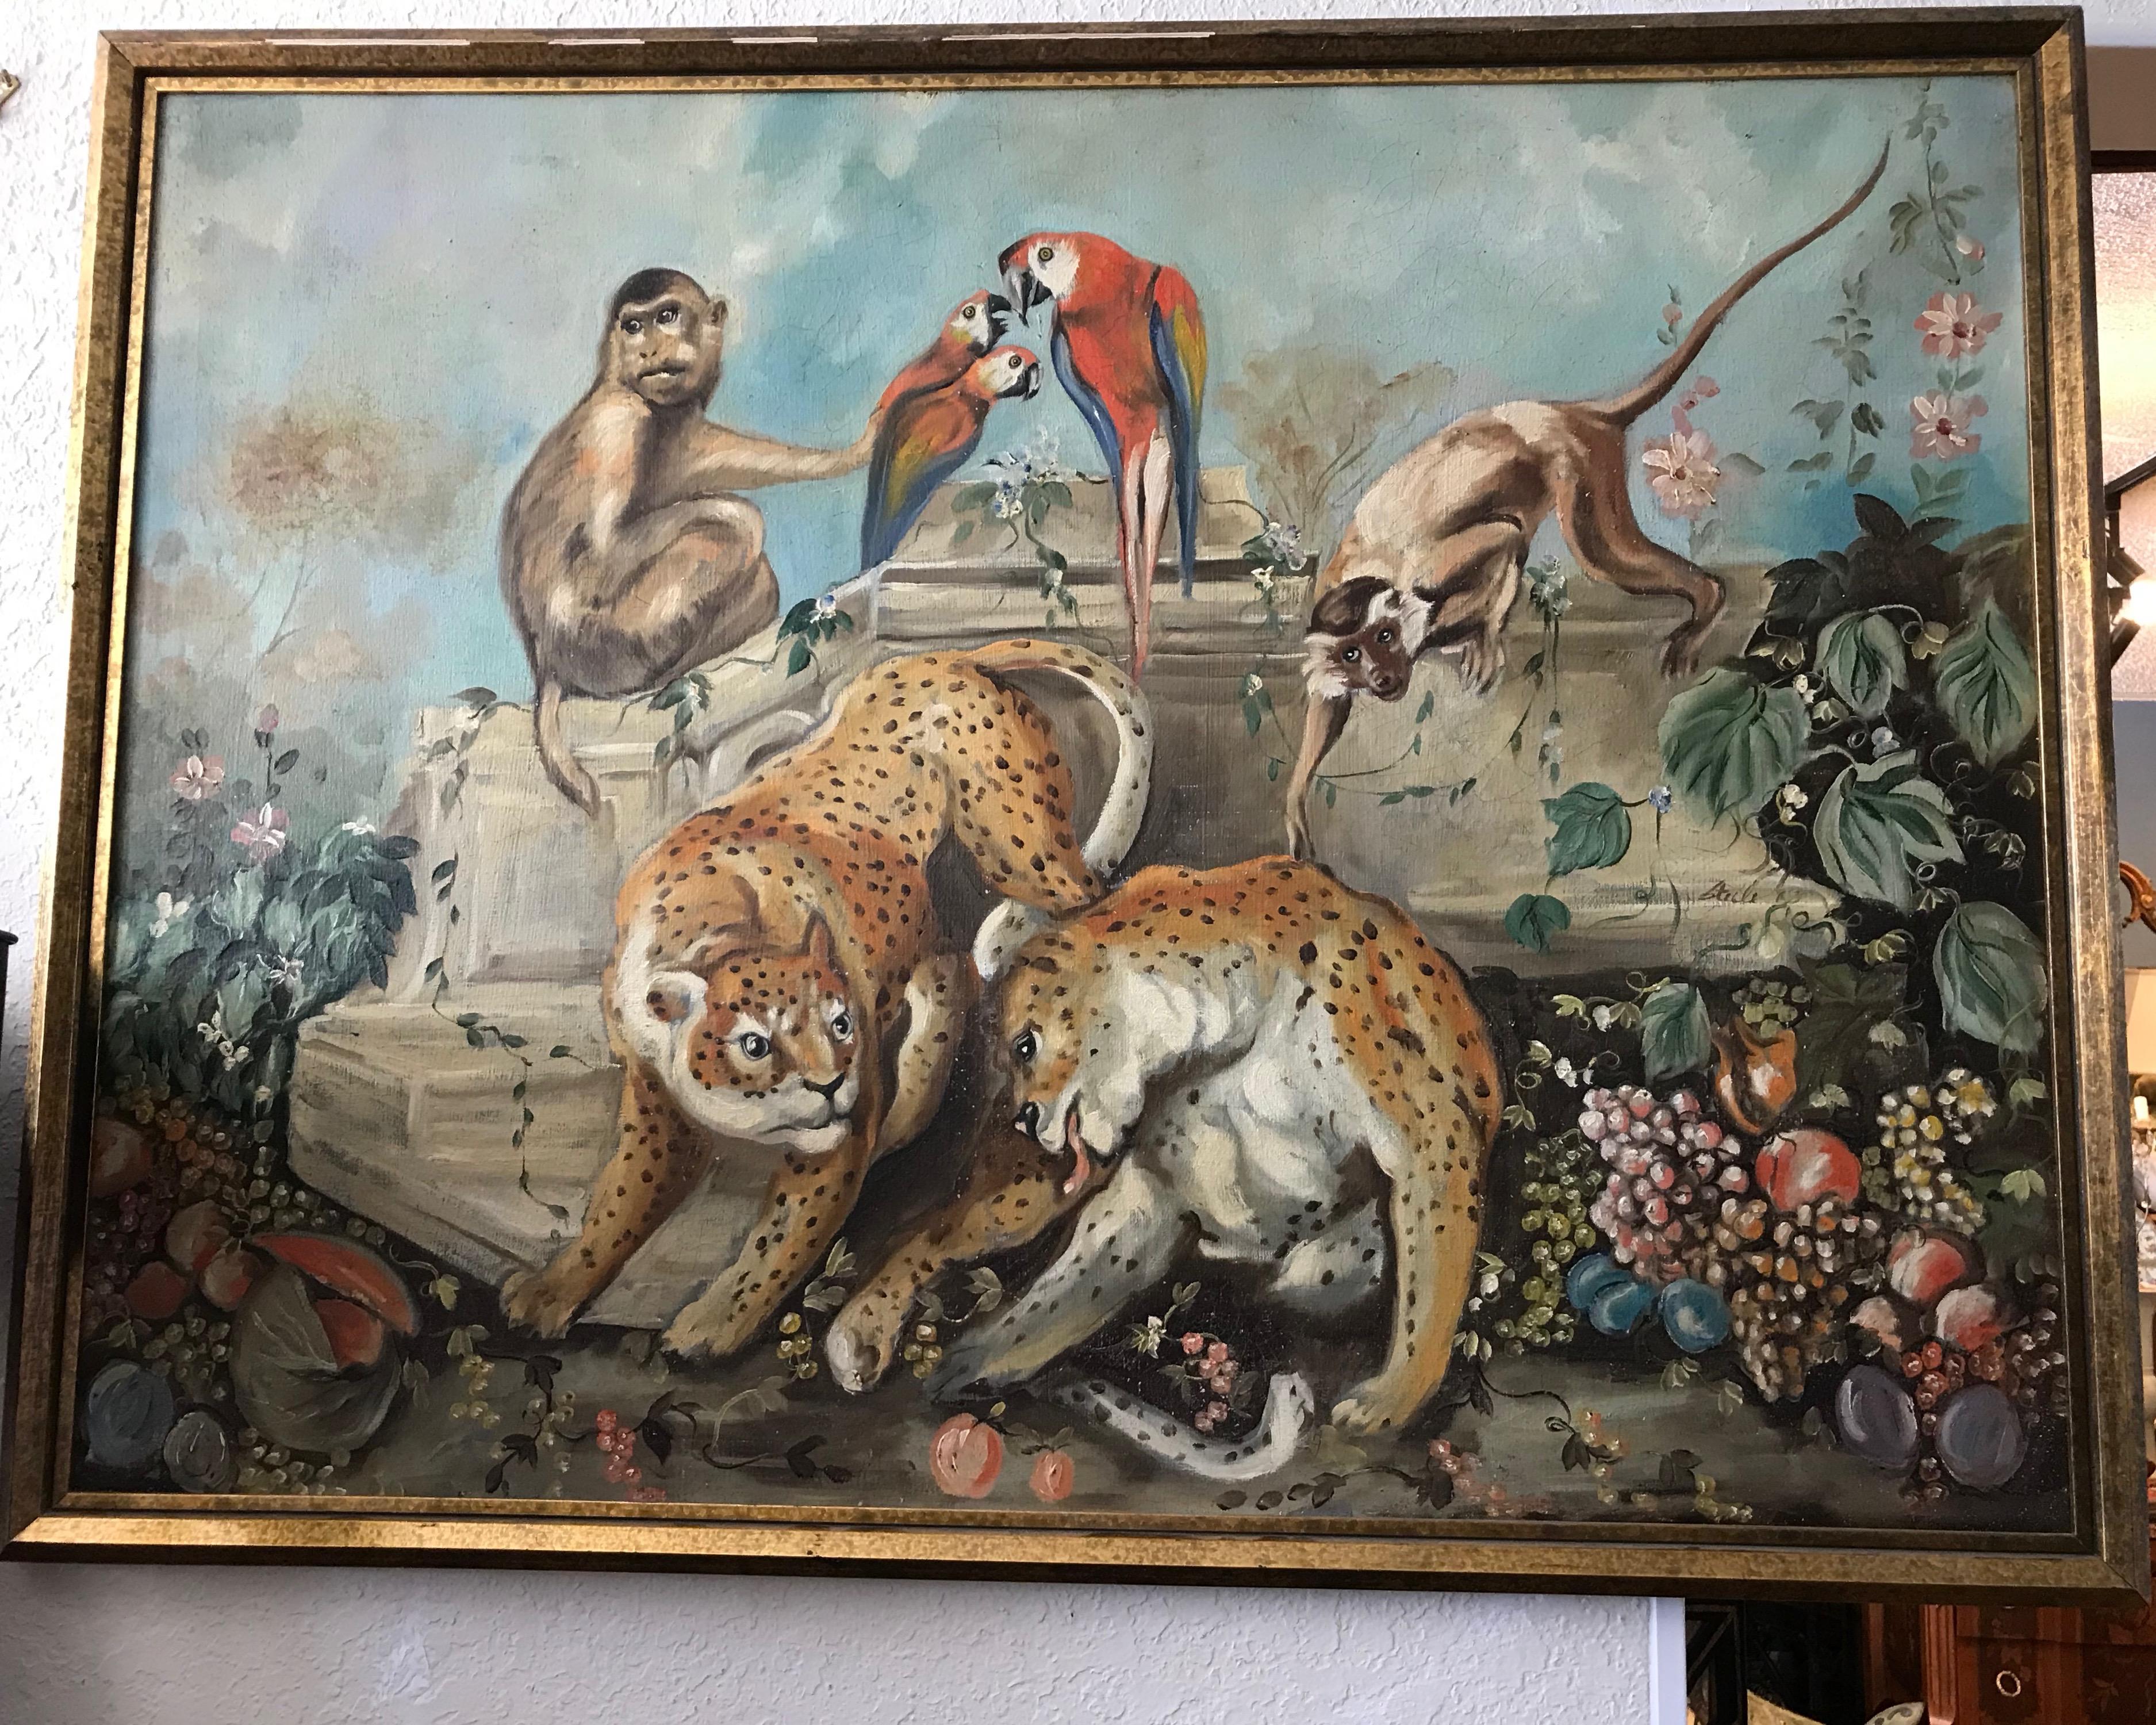 A wonderful tropical motif garden setting rendering with monkeys,
parrots , and leopards - truly one of a kind. Signed indistinctly
Beautiful scale and proportions. A superb old oil on canvas.